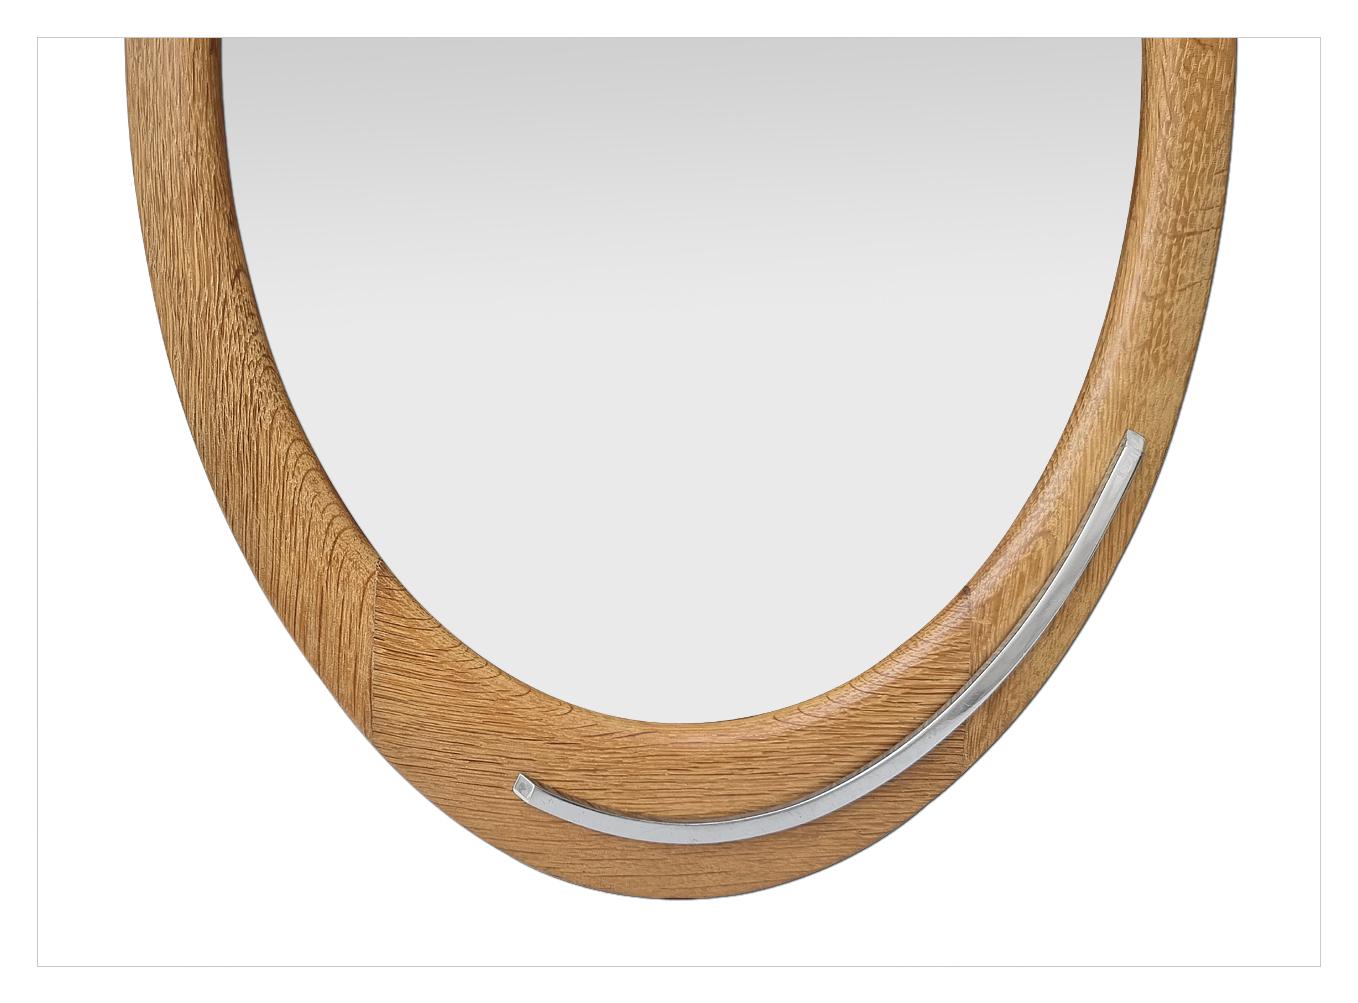 Mid-20th Century Antique French Oval Design Mirror, Oak Wood & Stainless Steel, circa 1960 For Sale